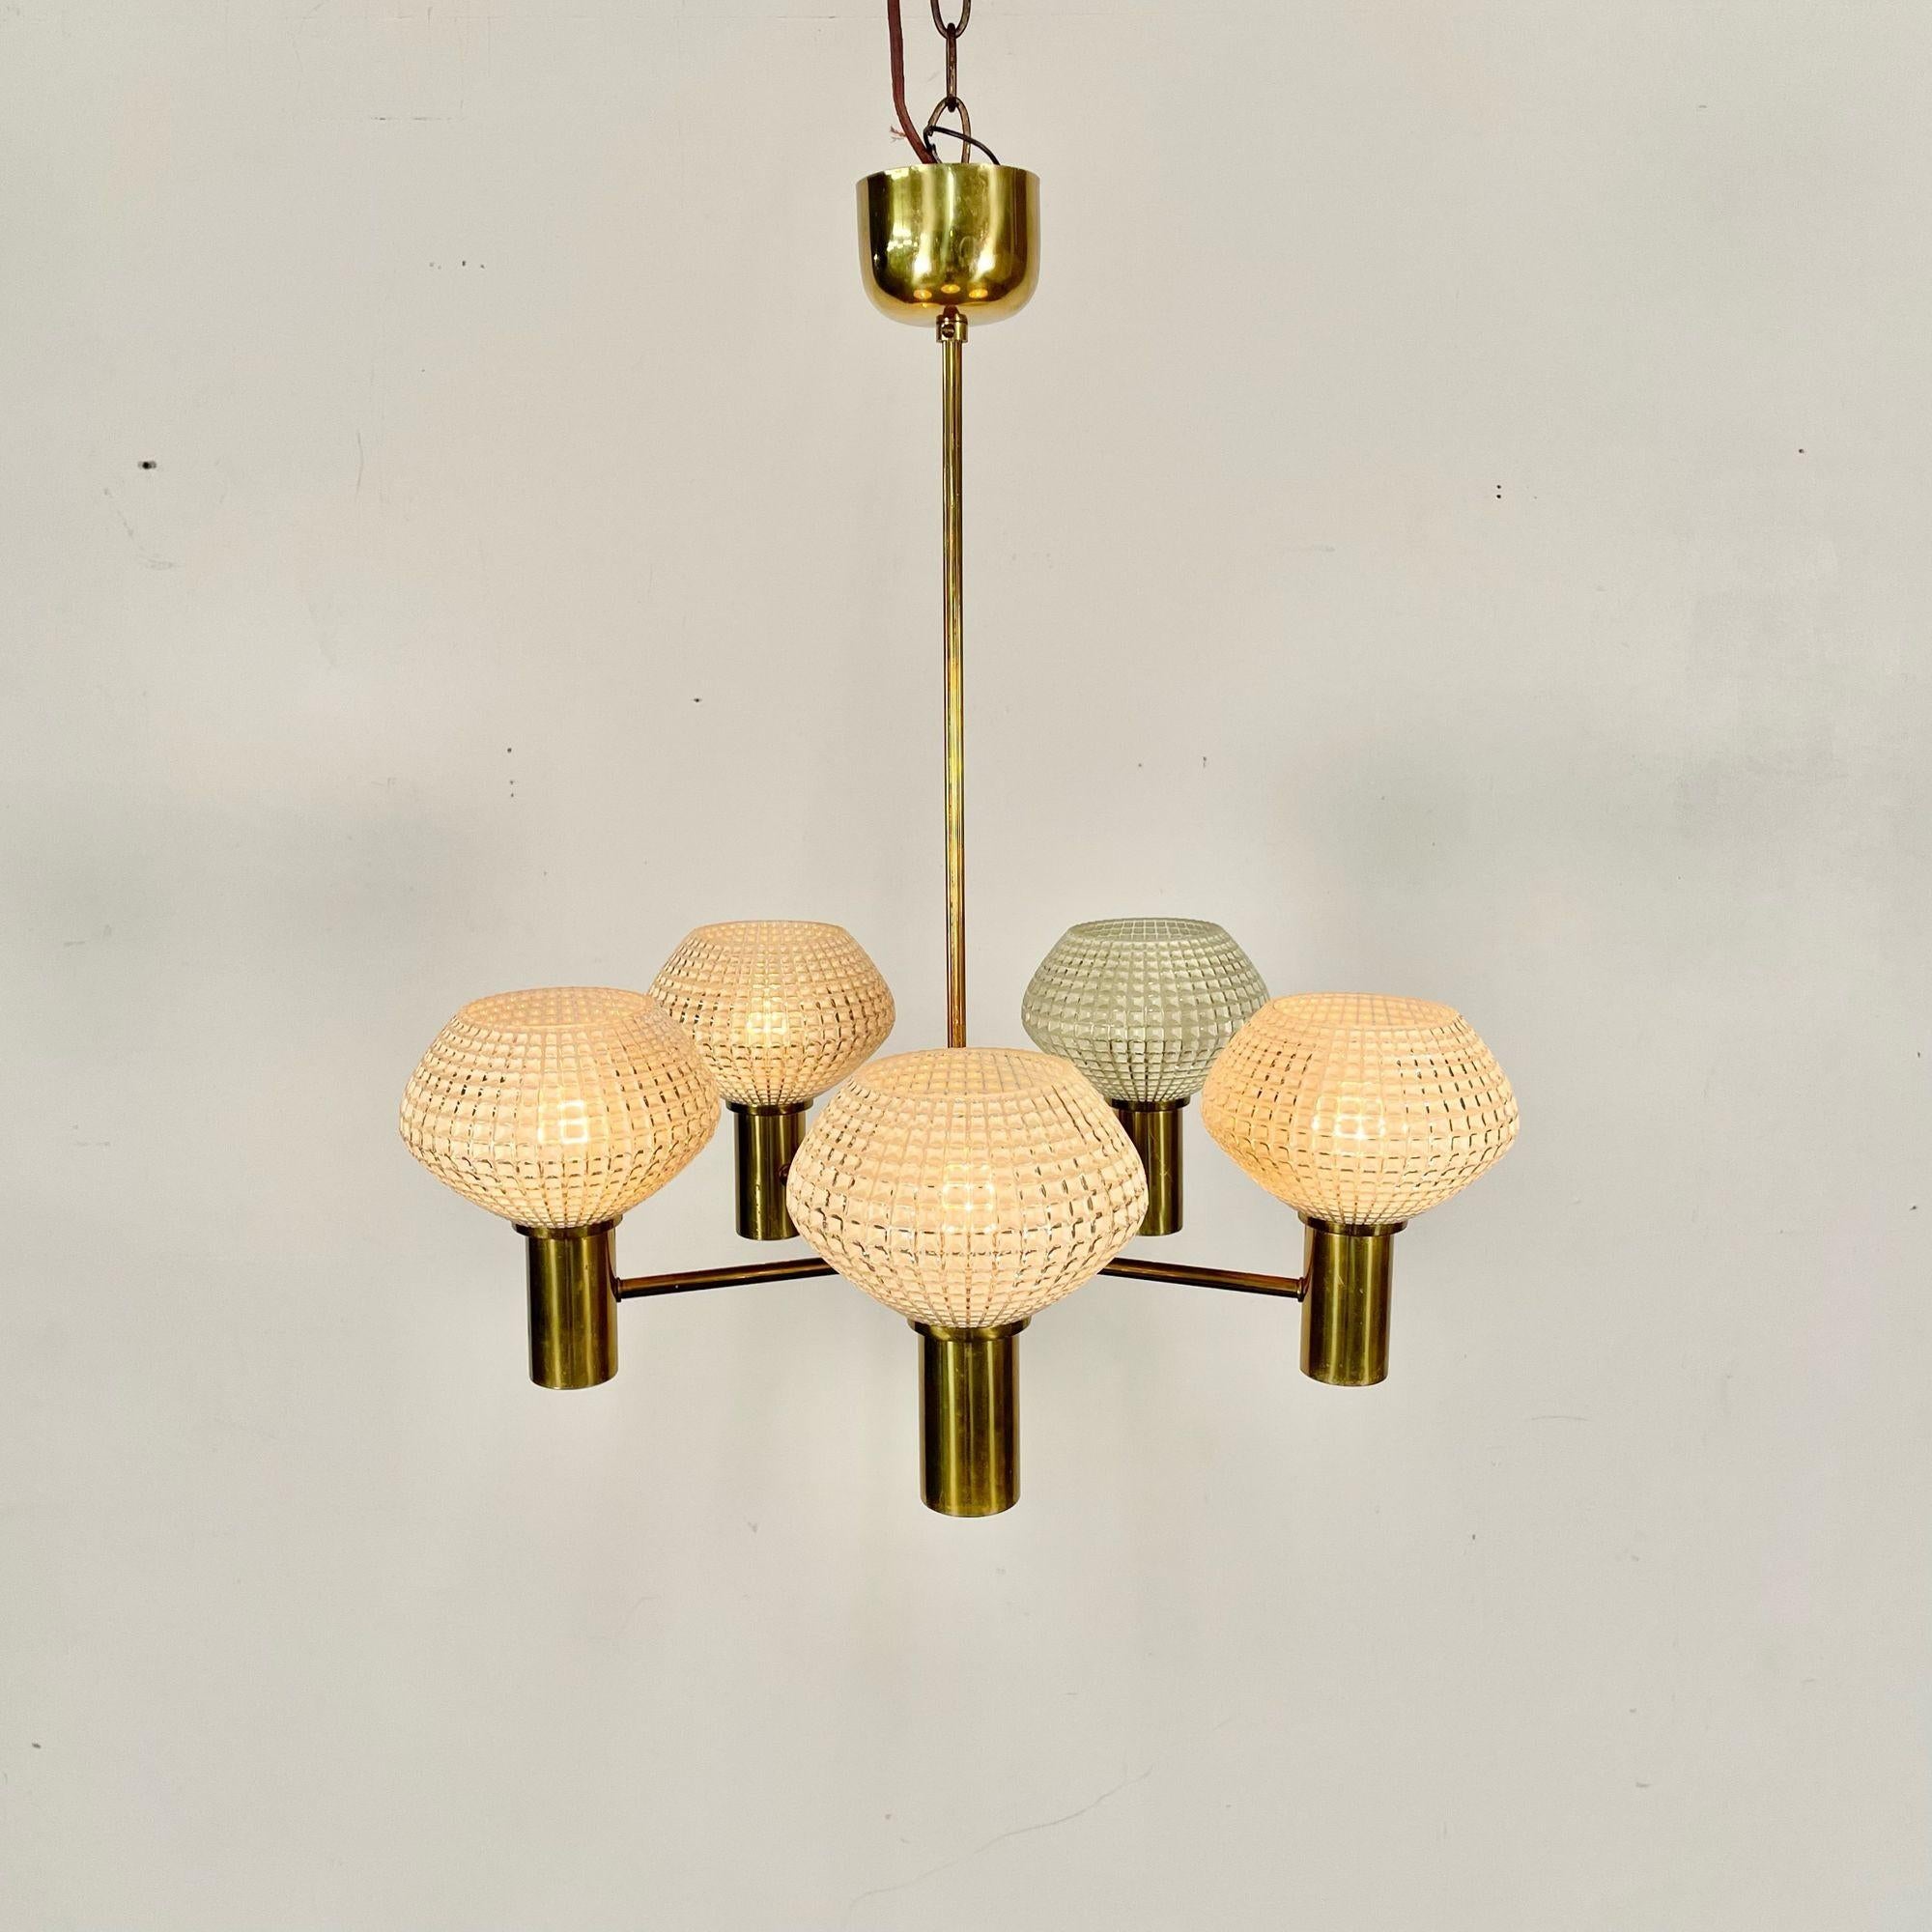 Swedish Mid-Century Modern Chandelier, Five Light, Brass and Textured Glass In Good Condition For Sale In Stamford, CT